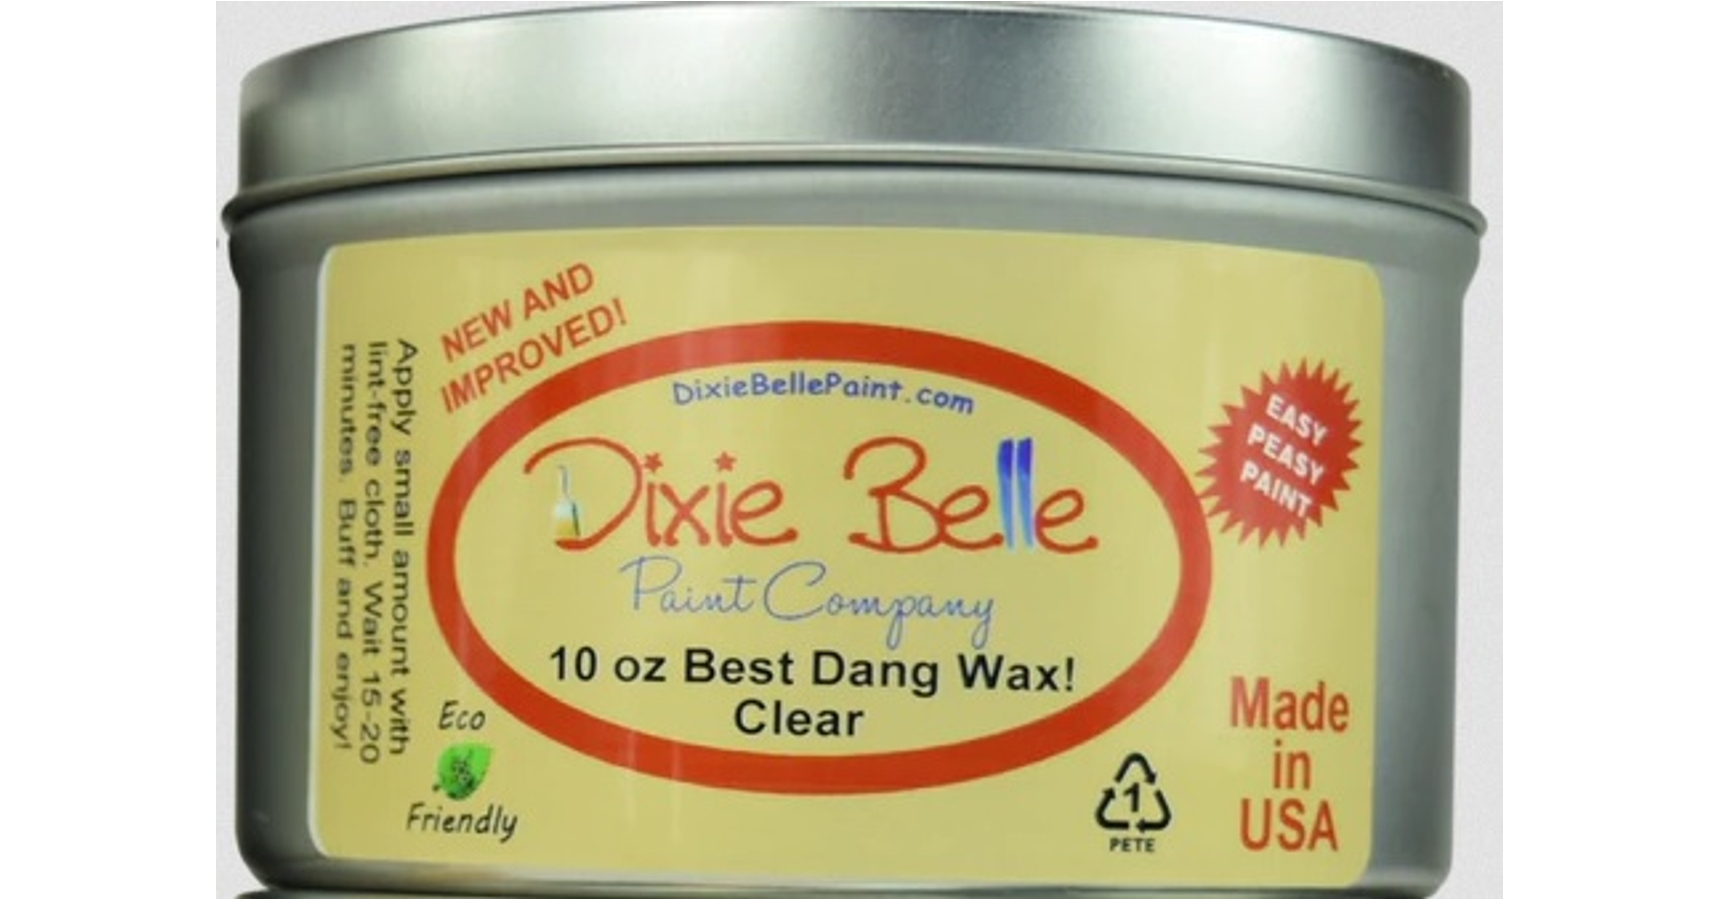 Dixie Belle Best Dang Wax: Why Choose This Wax Product